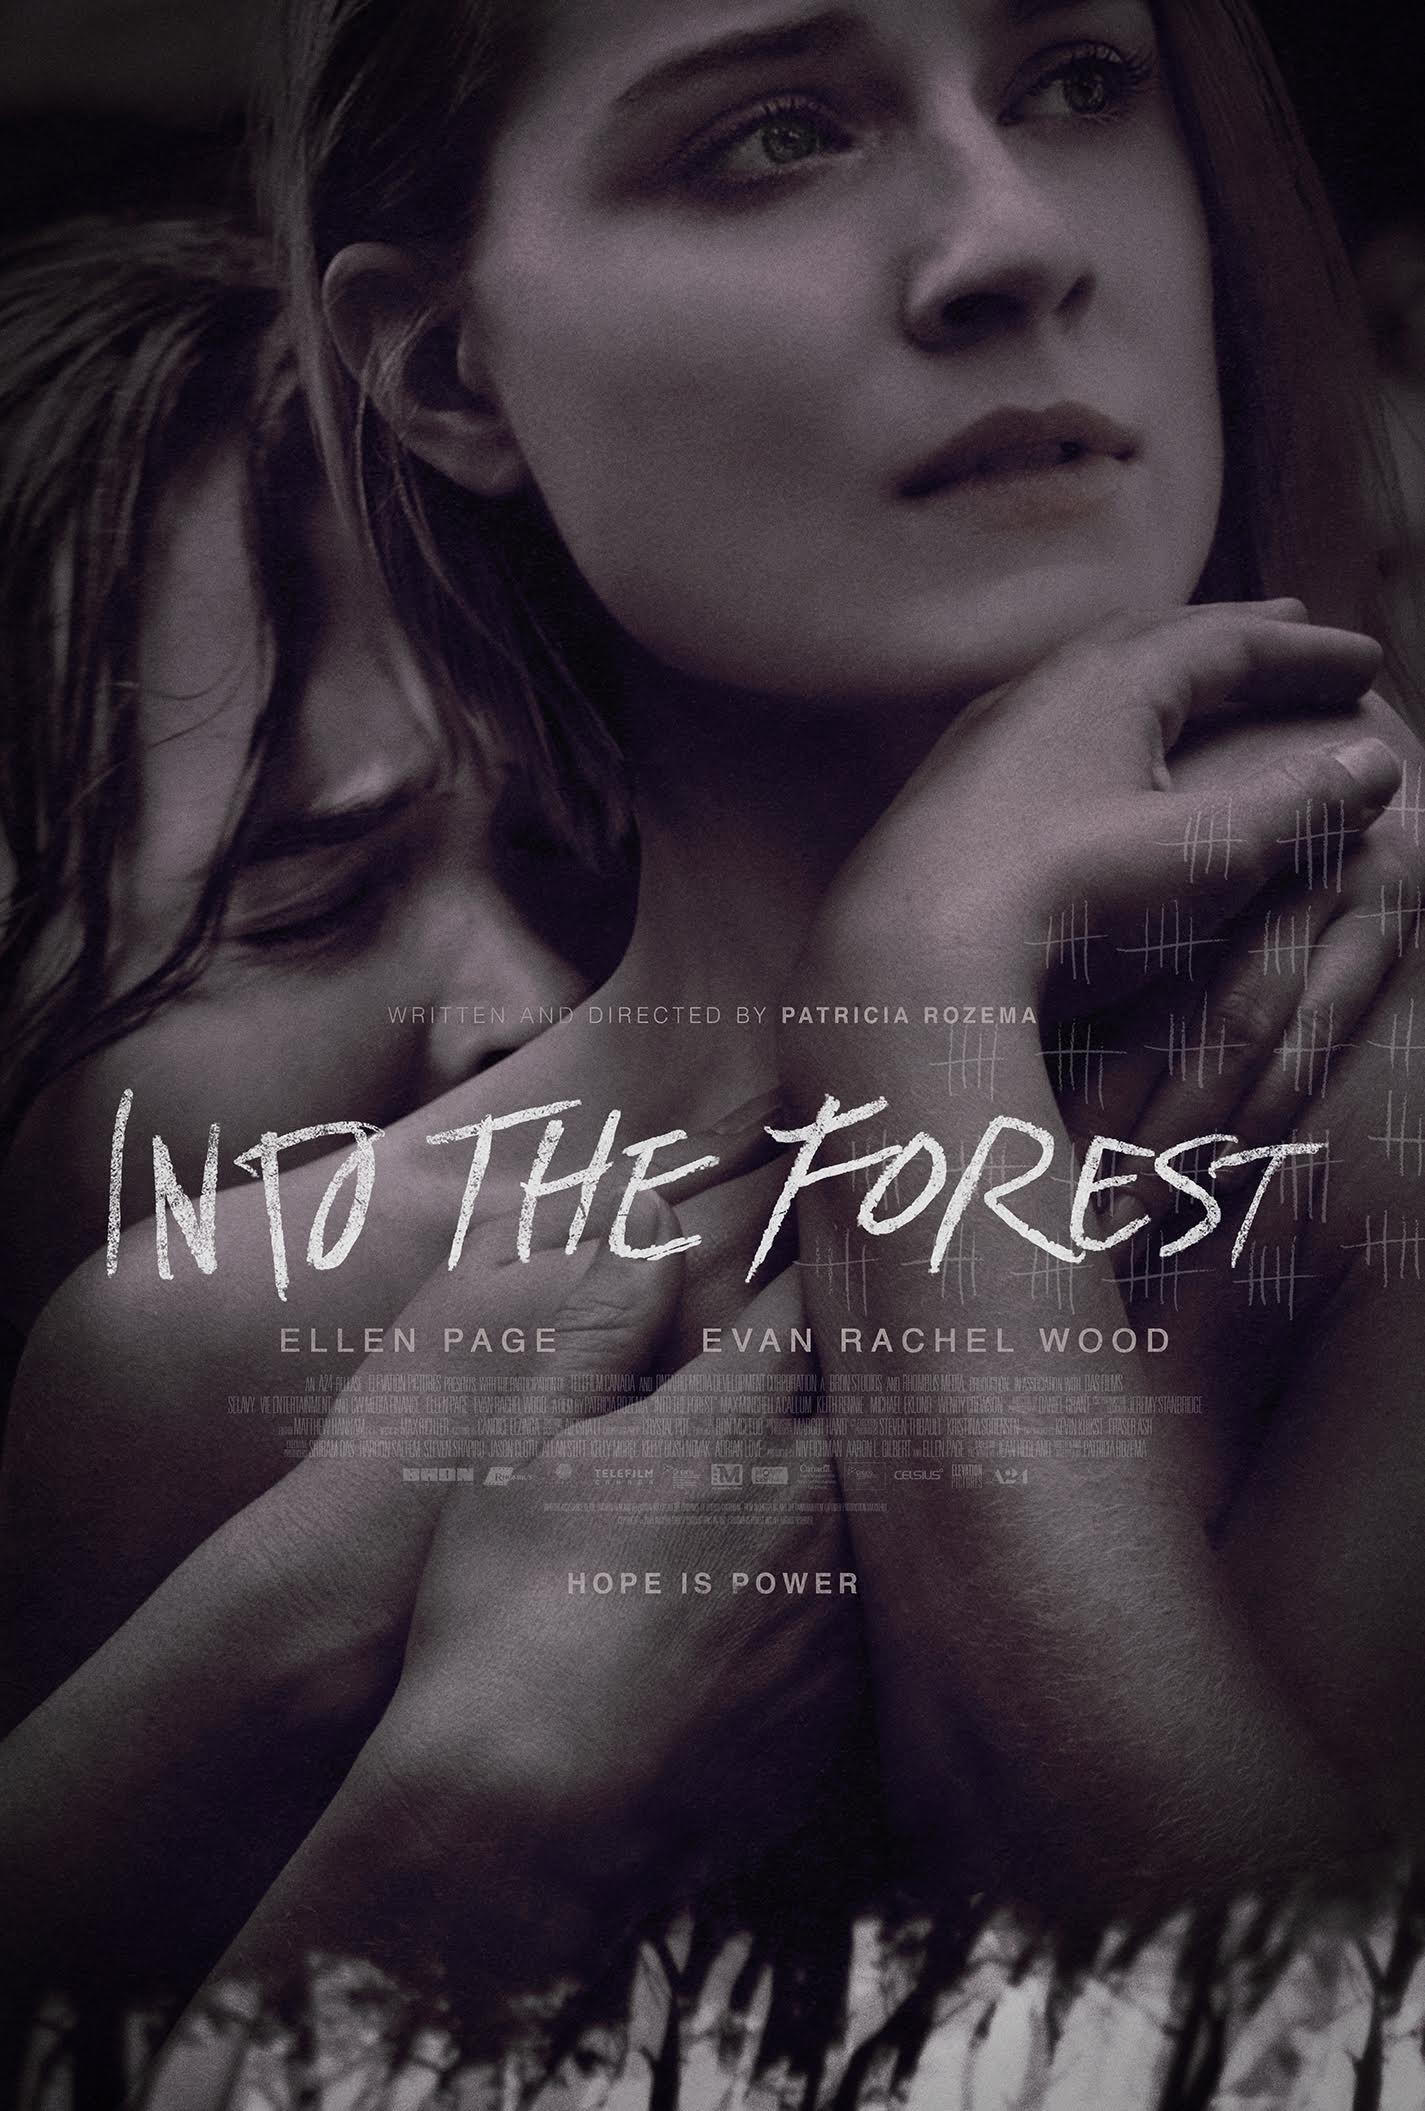 Forest Rep Sex Video - Into the Forest - Rotten Tomatoes